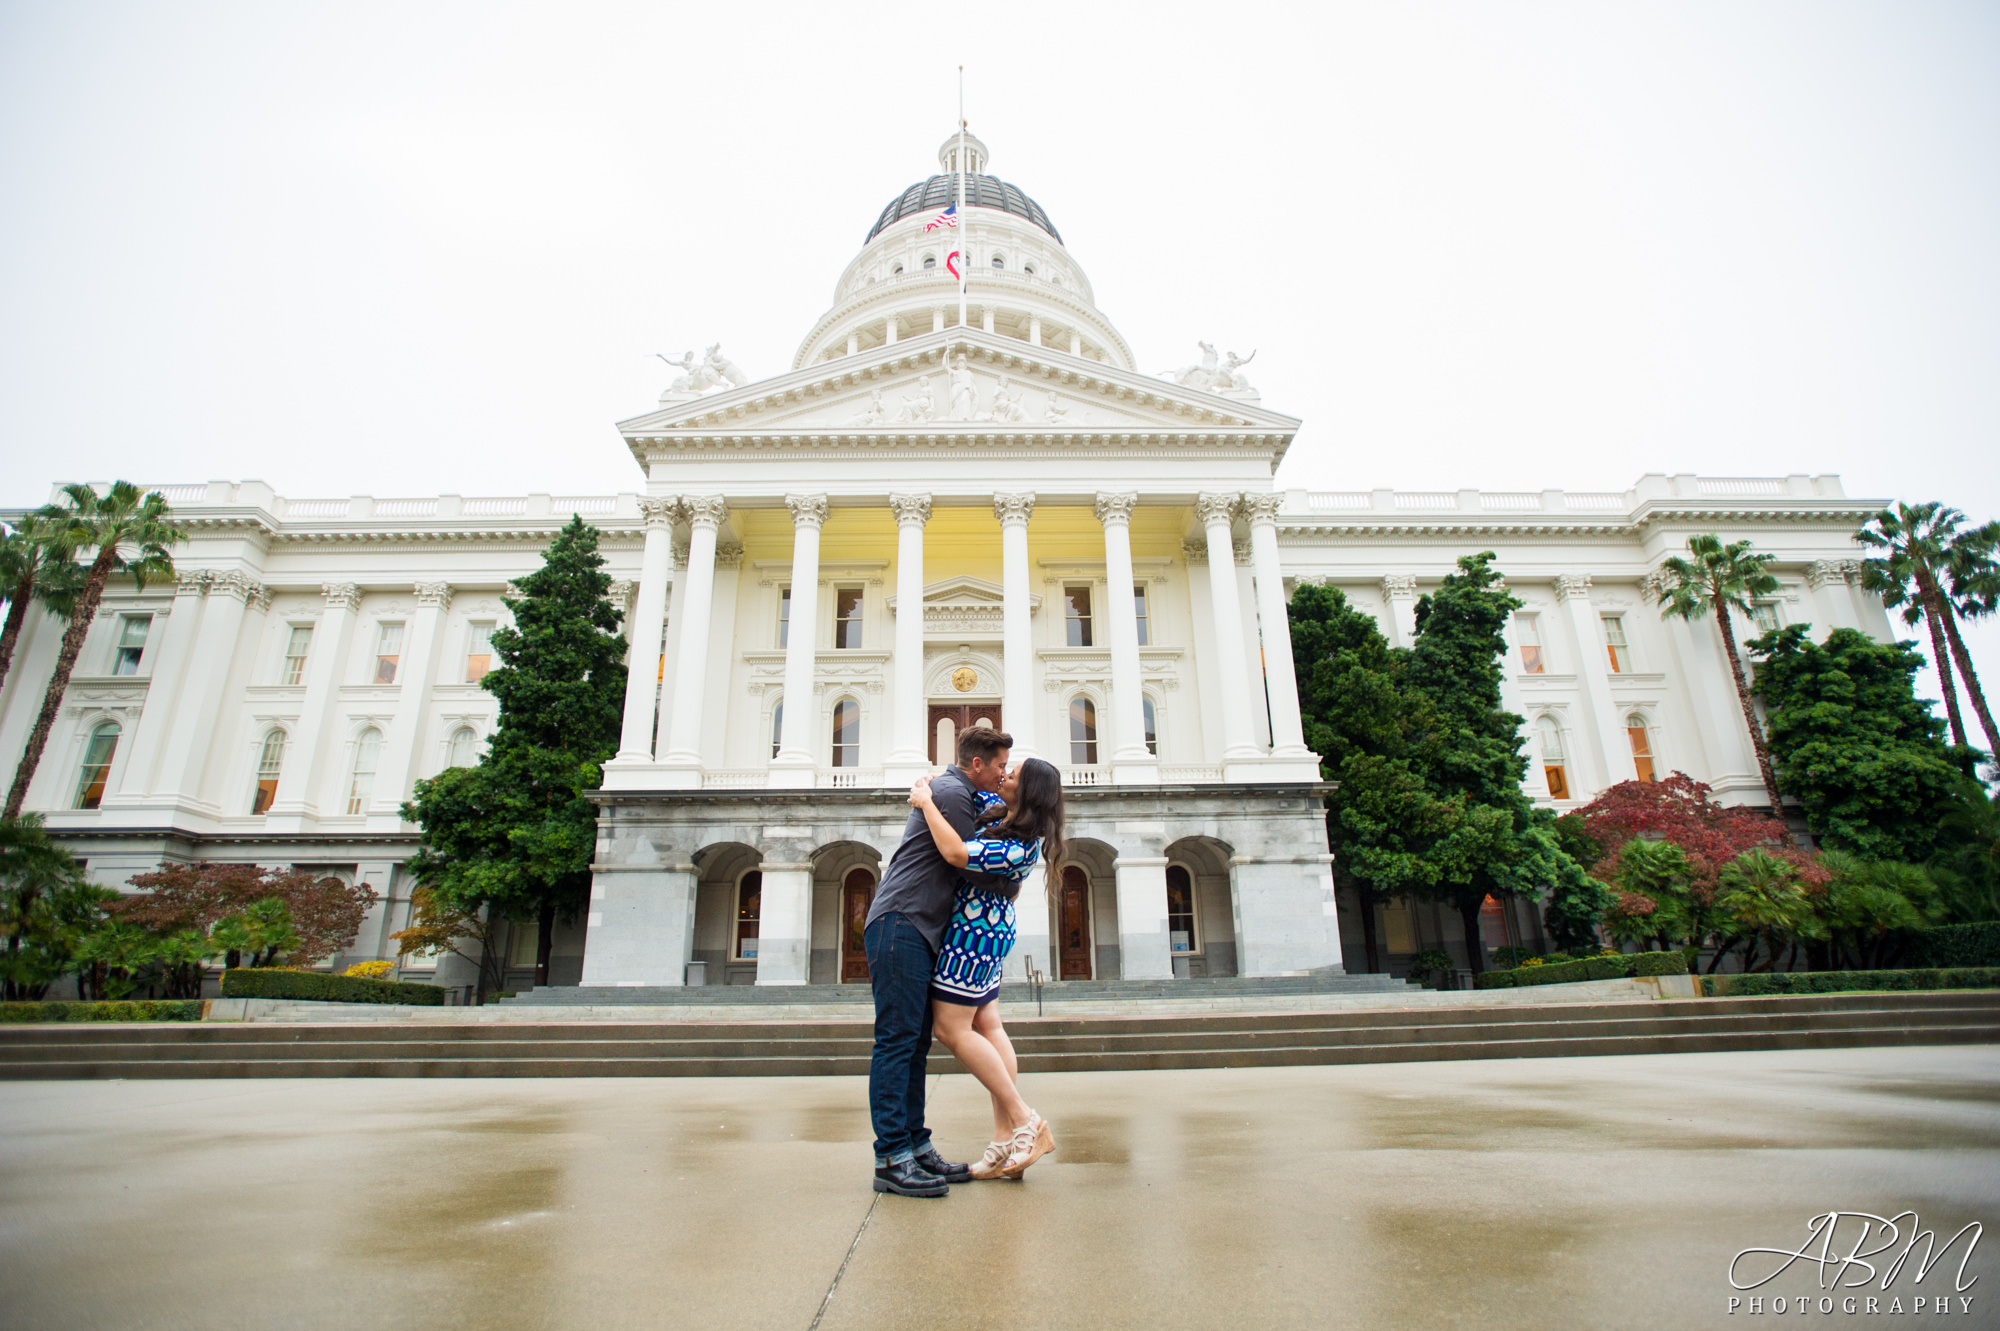 sacromento-fire-station-engagement-san-diego-wedding-photography-0007-1 Fire Station 5 | State Capital | Sacramento | Chalyn + Jen’s Engagement Photography